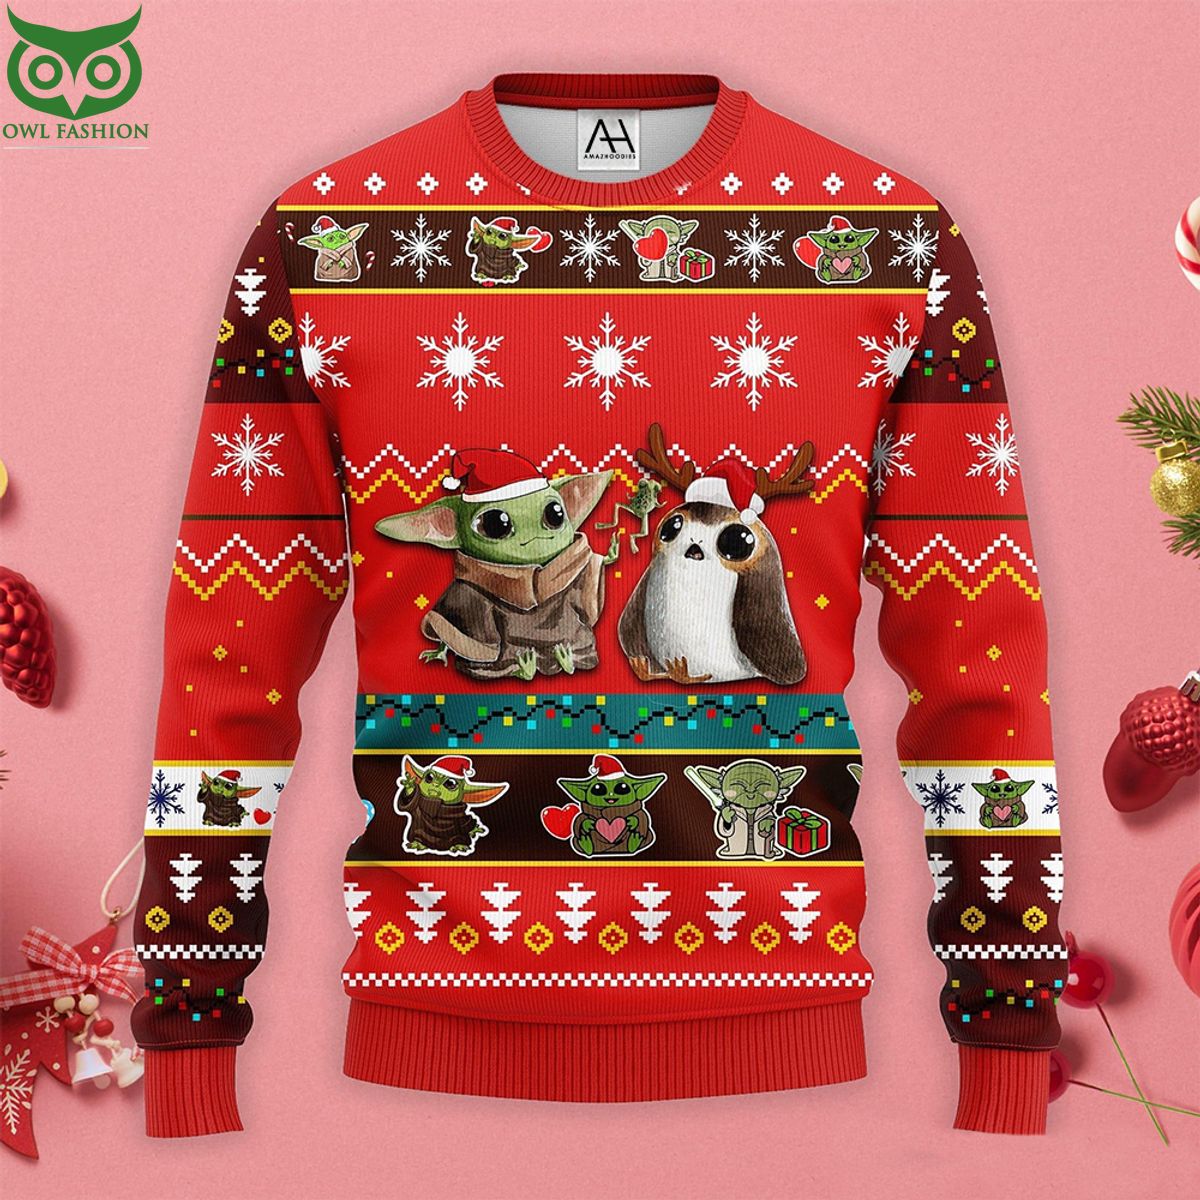 Two Dallas ugly Christmas sweater stores have a knit to pick with